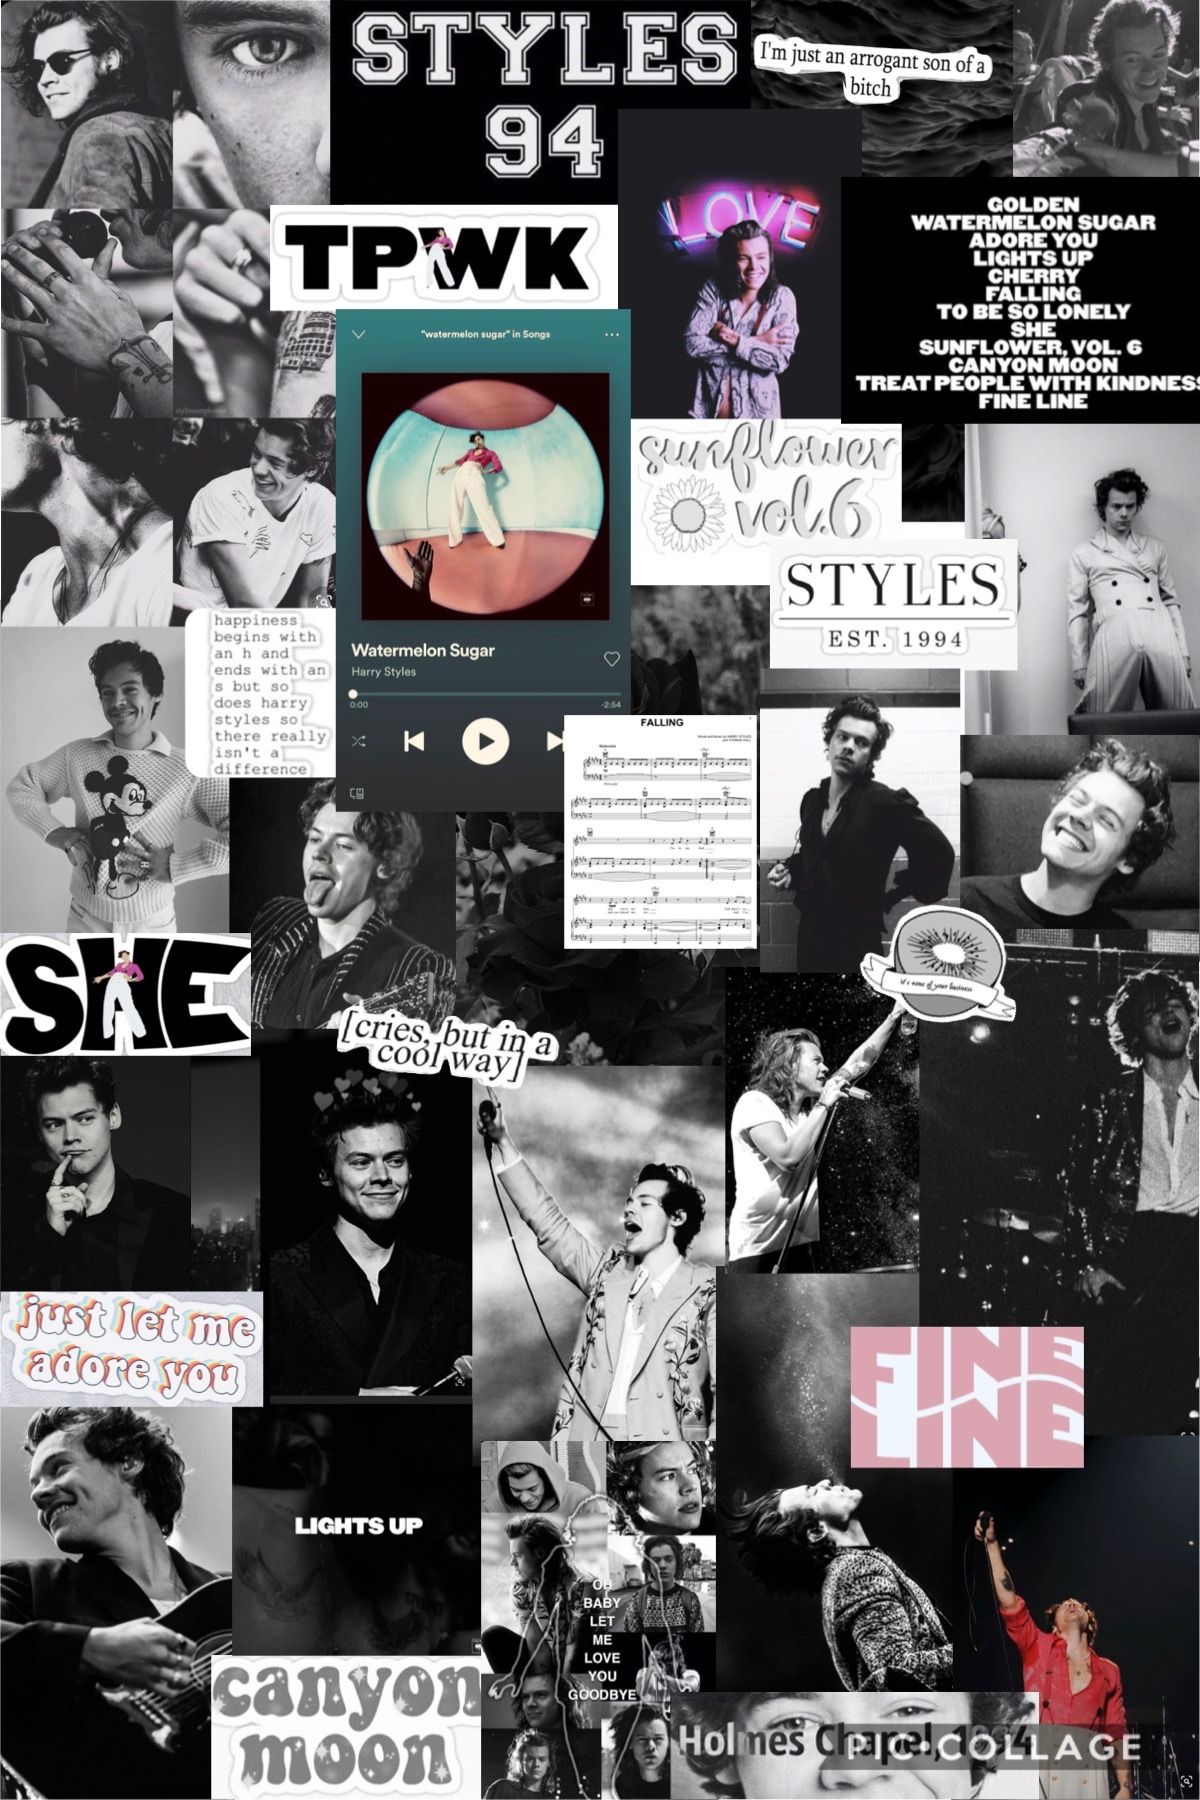 Harry Styles x. Harry styles, Harry styles wallpaper, Harry styles poster